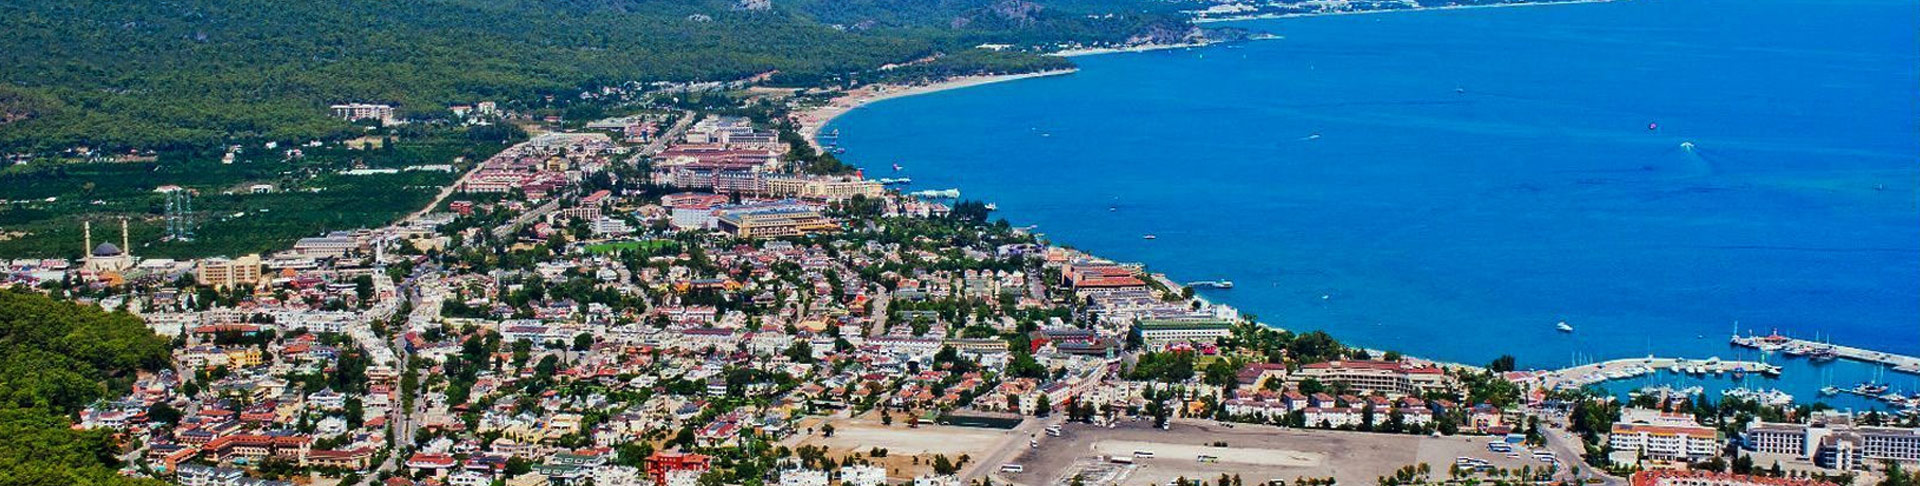 Kemer airport taxi transfer from-to airport, holiday hotel transport, Antalya airport vacation travel Turkey